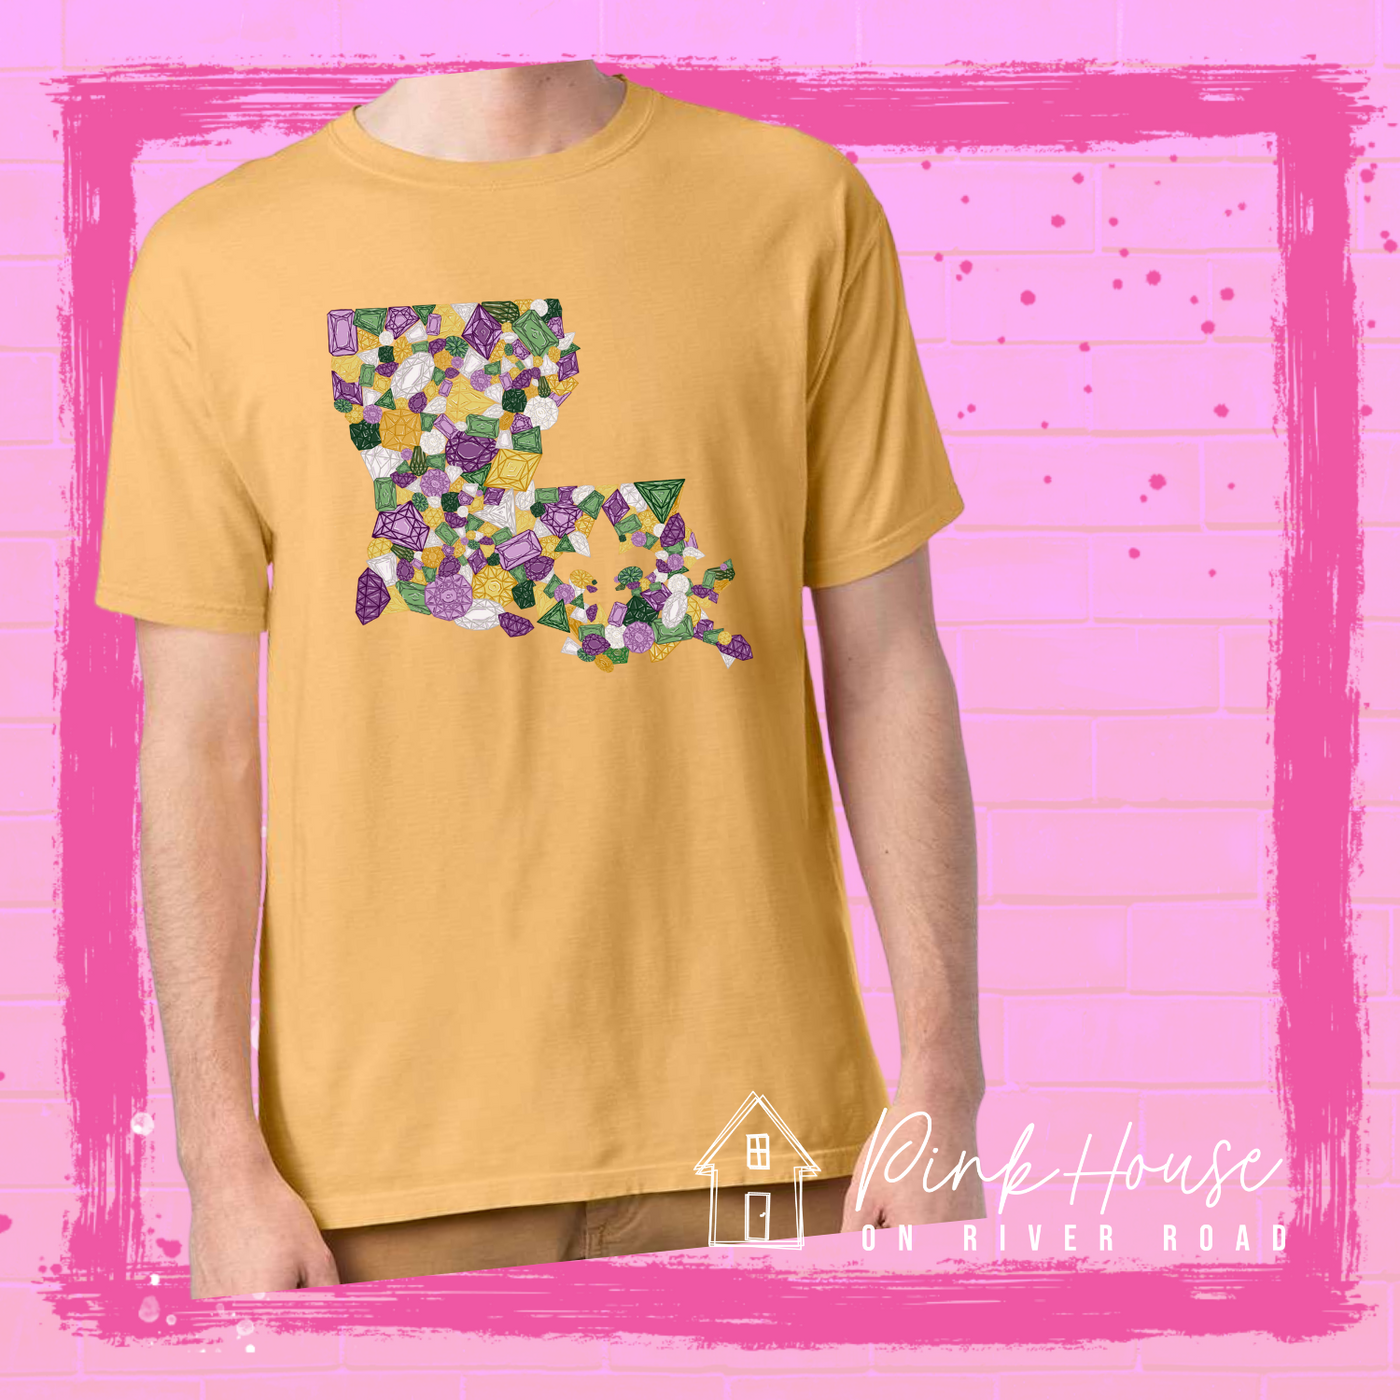 Mustard tee with a graphic of the state of Louisiana compromised of different shapes and sizes of purple, green, yellow and clear jewels.